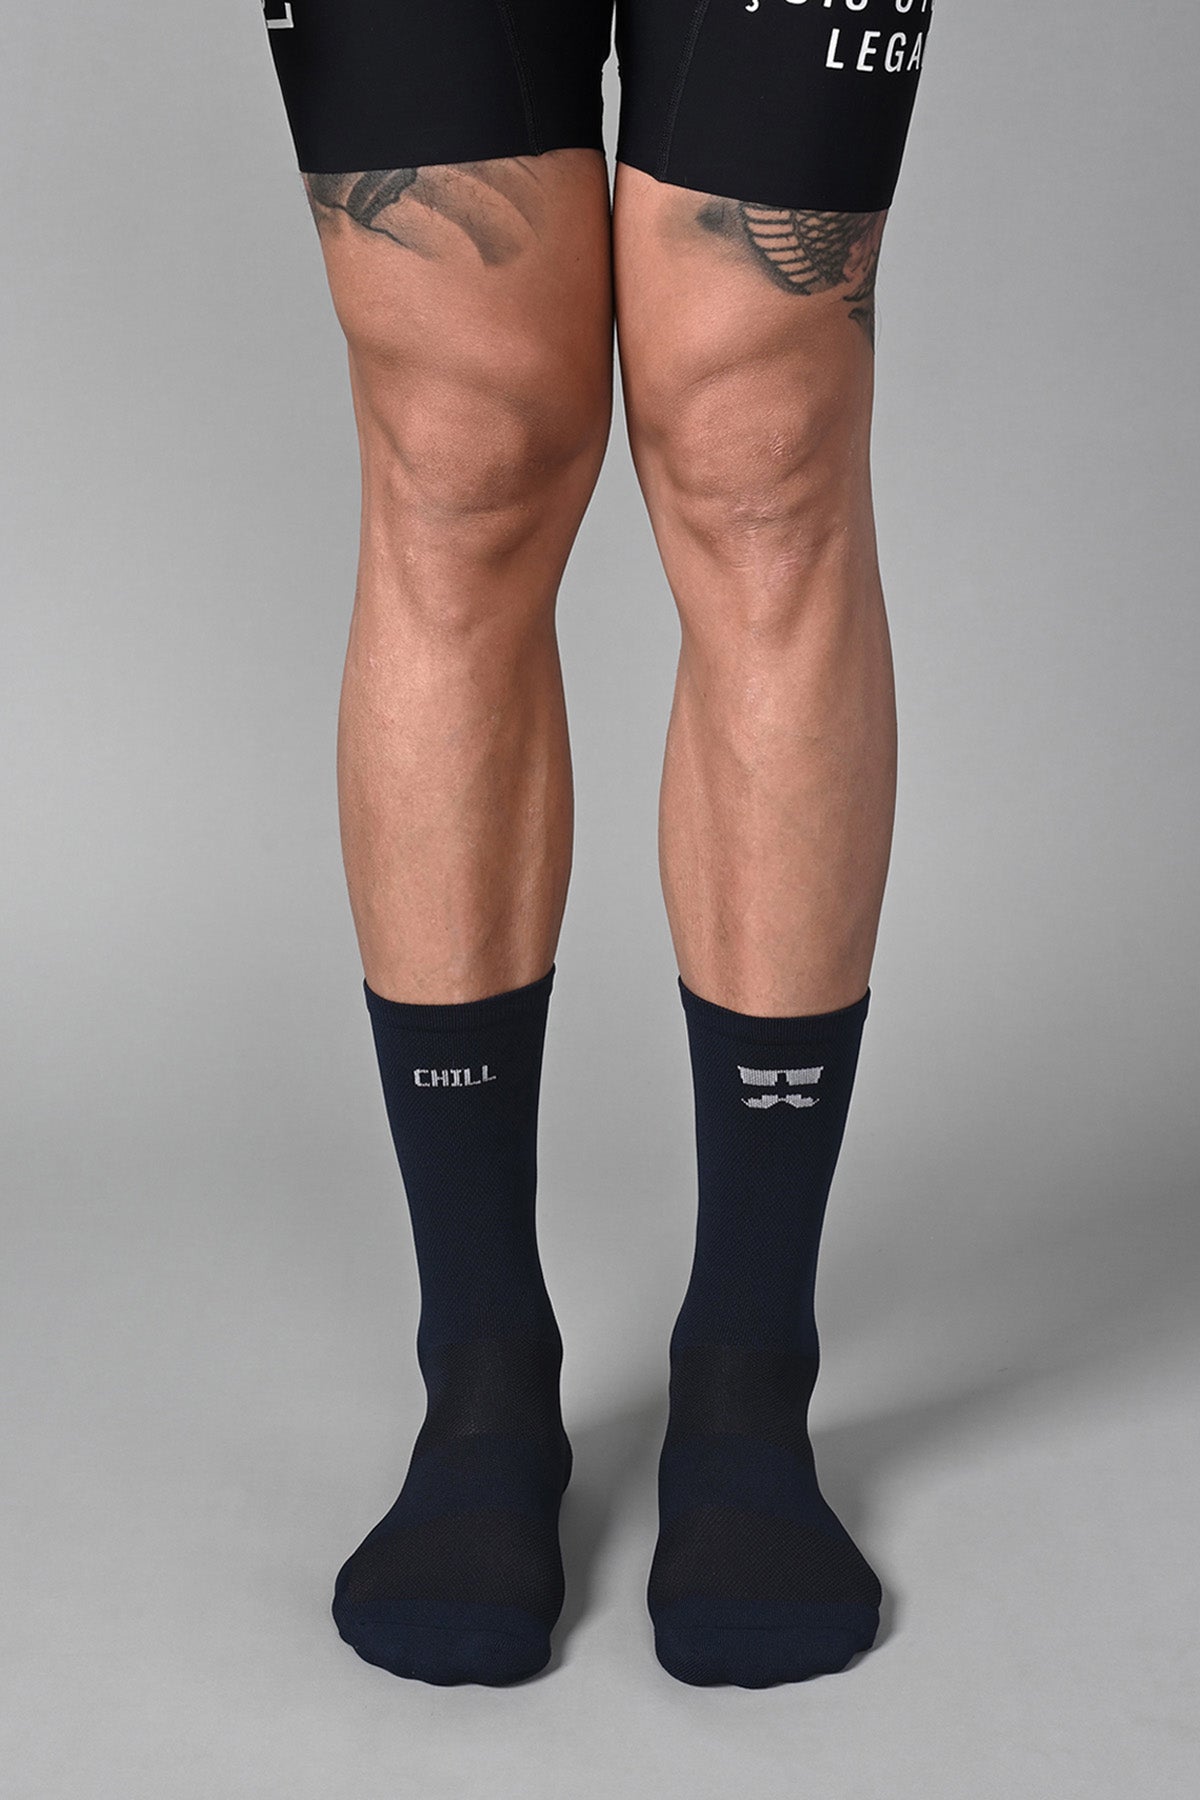 CHILL BRO - NAVY FRONT | BEST CYCLING SOCKS